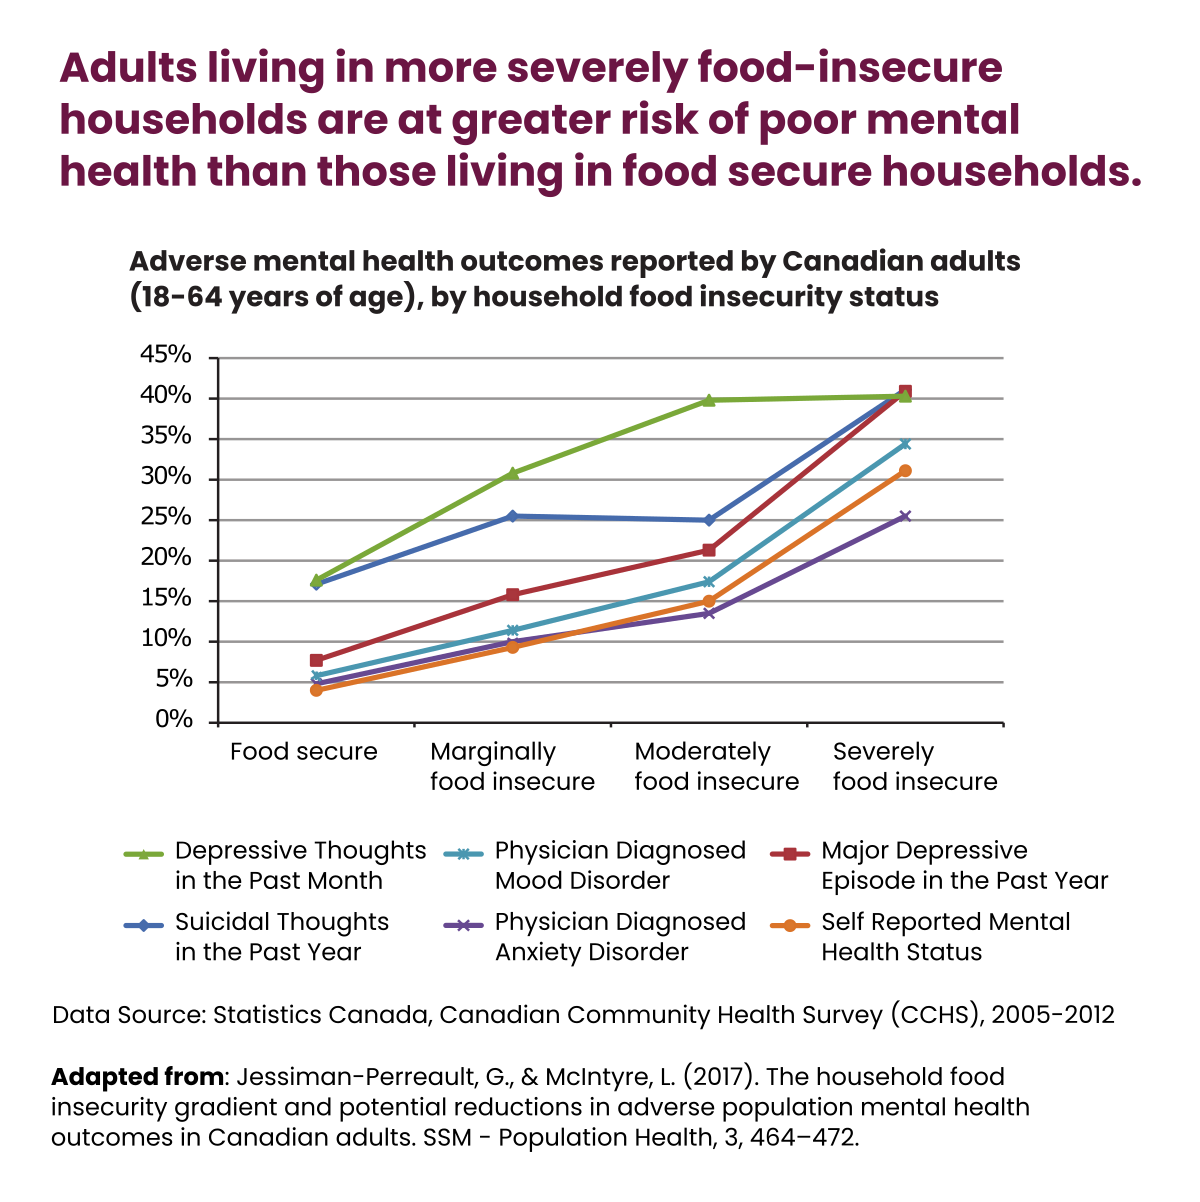 Adults living in more severely food-insecure households are at greater risk of poor mental health than those living in food secure households.